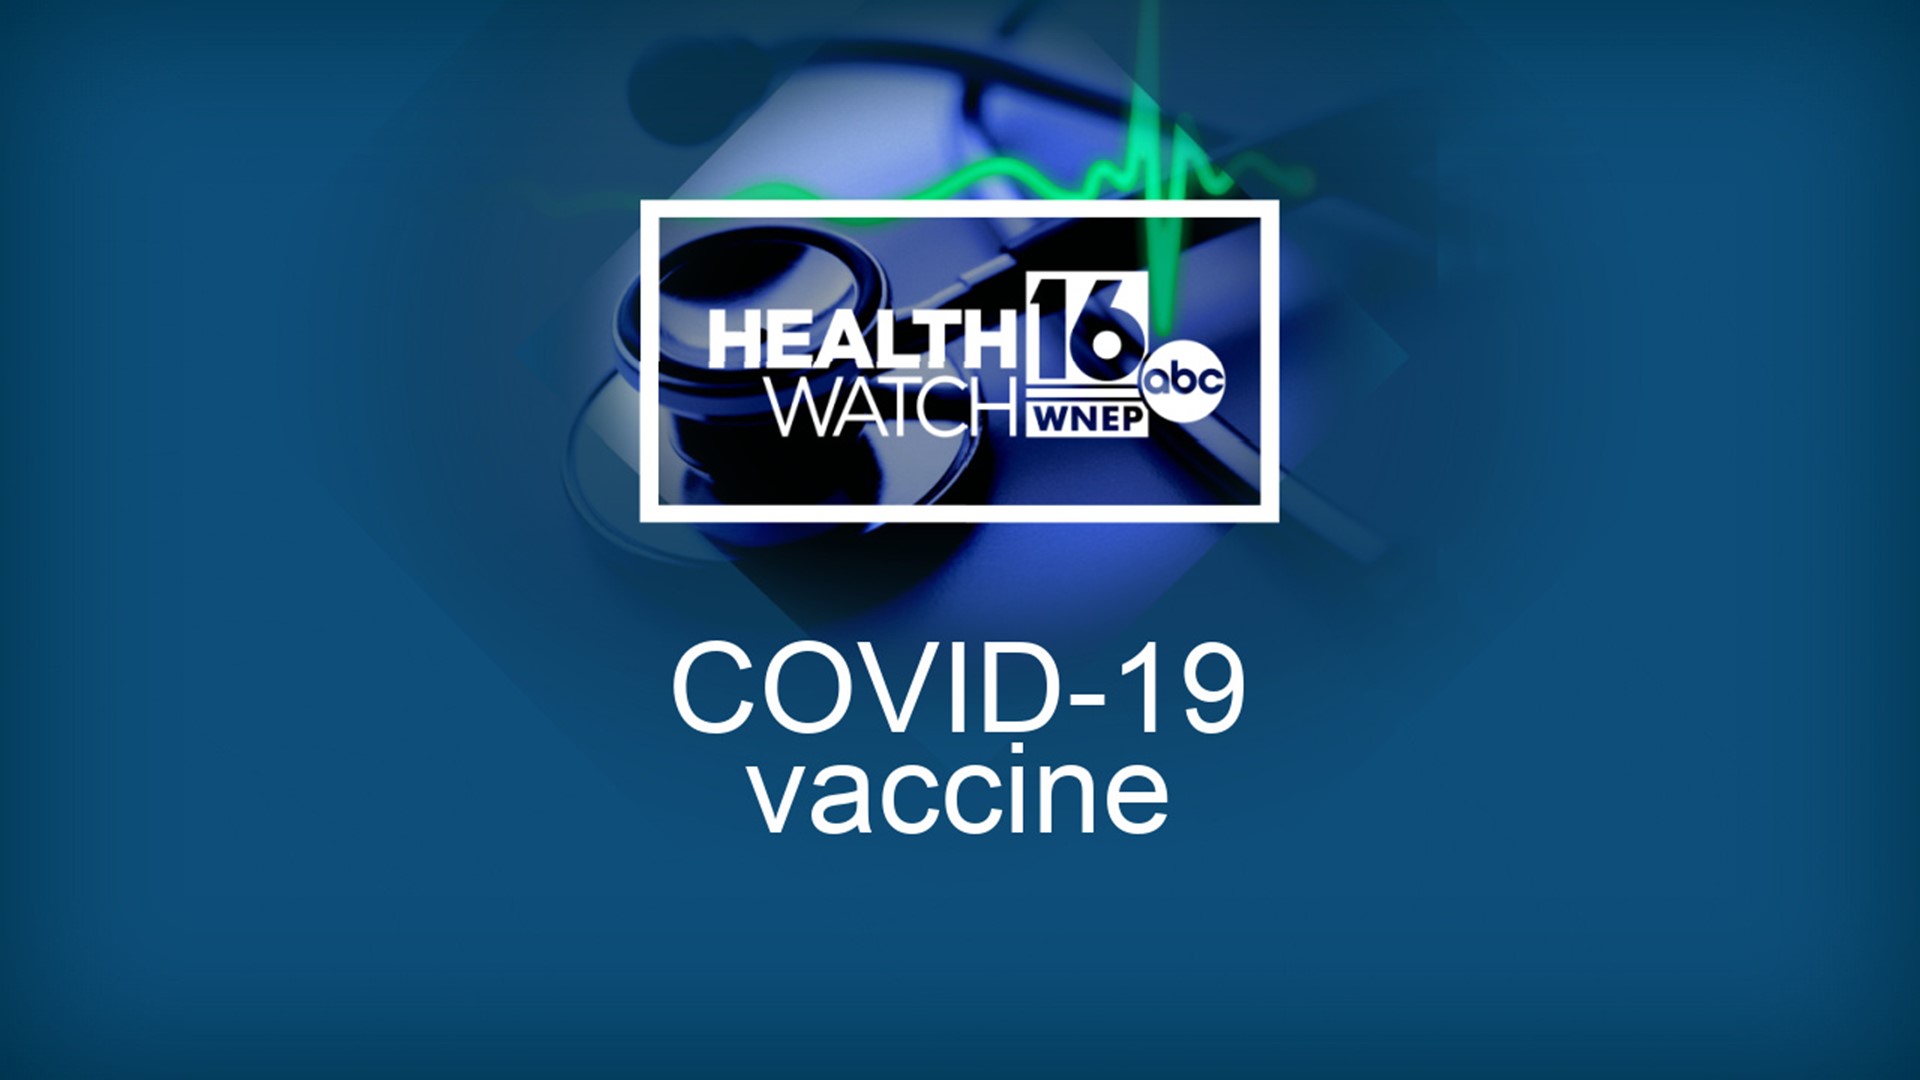 This week, the first COVID-19 vaccines were rolled out nationwide. But people seem to have a lot of questions, which we took to an expert at Geisinger.